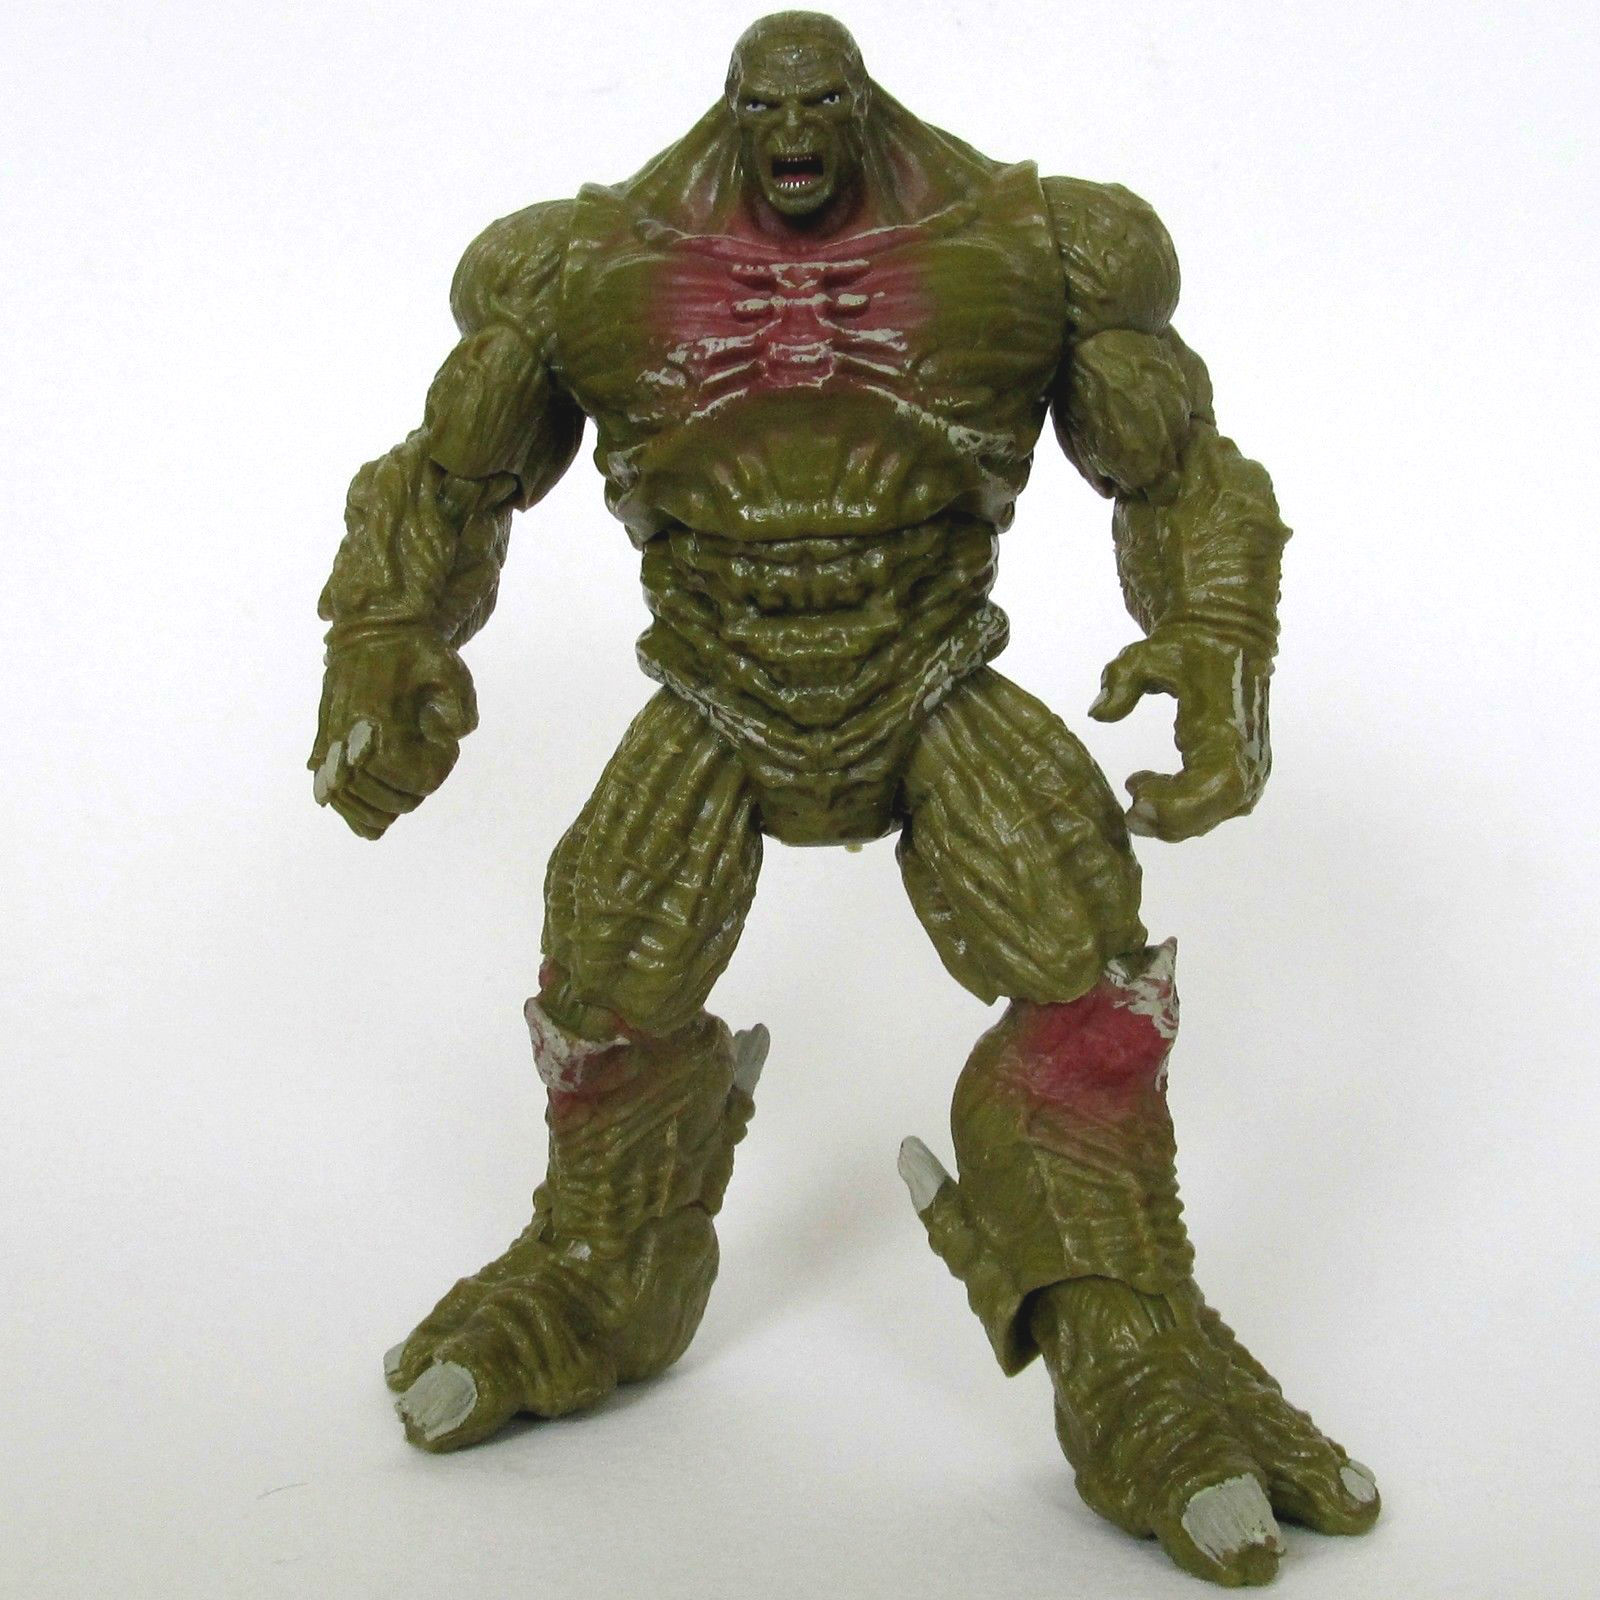 abomination 2008 toy.